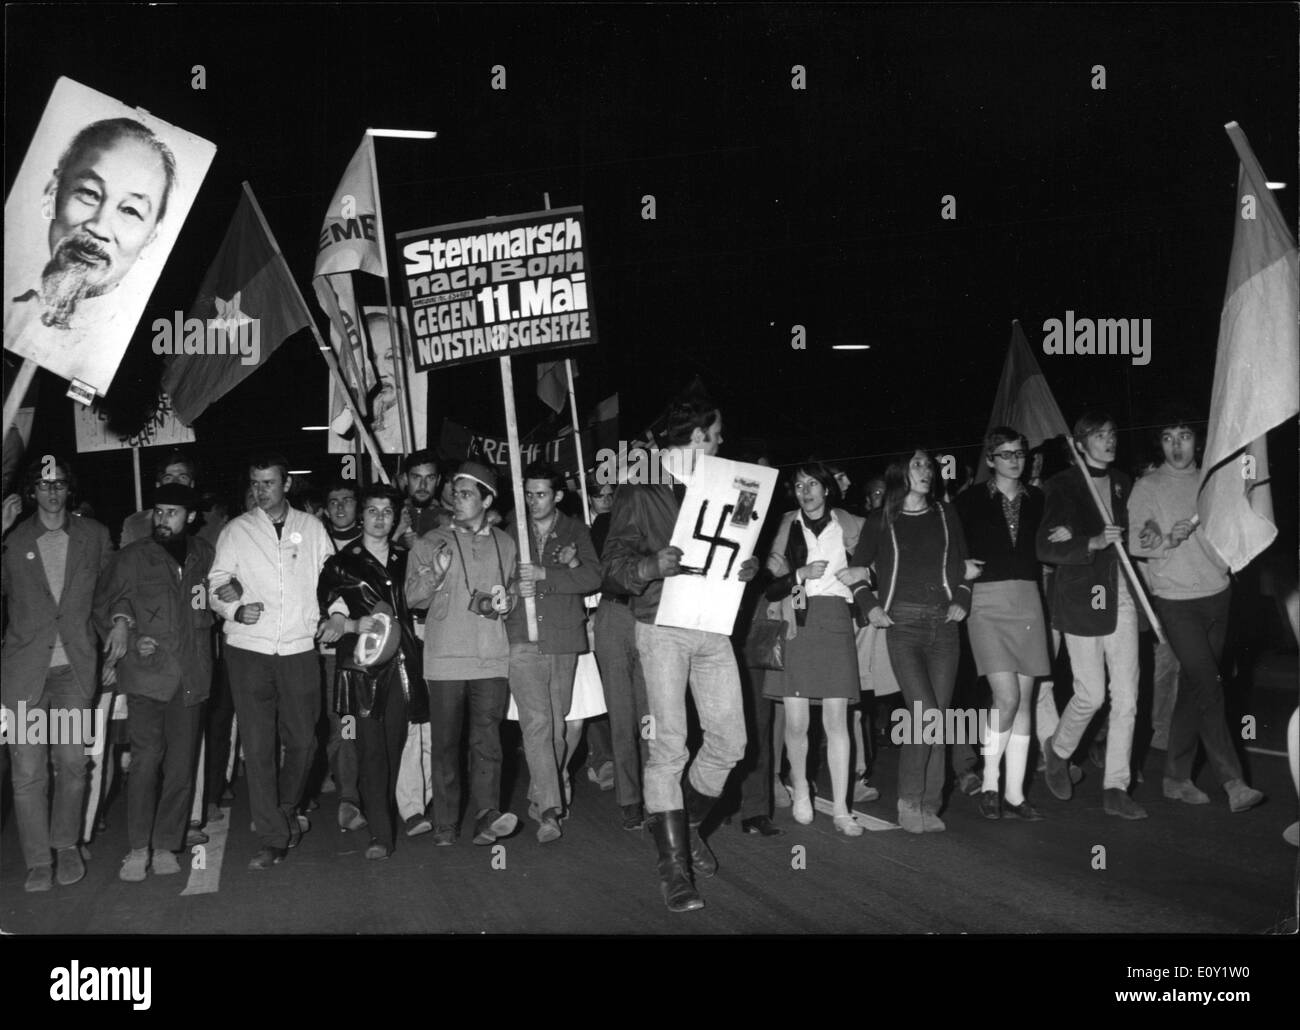 May 09, 1968 - Ms Tschi Minh and No end: From the US barracks in Munich to the University went a protest procession of the ''beside parliament-opposition'' which demanded a comment with paroles against the war in Vietnam and against any dictatorship. In spite of the currently increasing number of demonstrators no incidents happened. Photo Shows Demonstration procession of the ''beside-parliament-opposition'' with the usual transparencies. Stock Photo